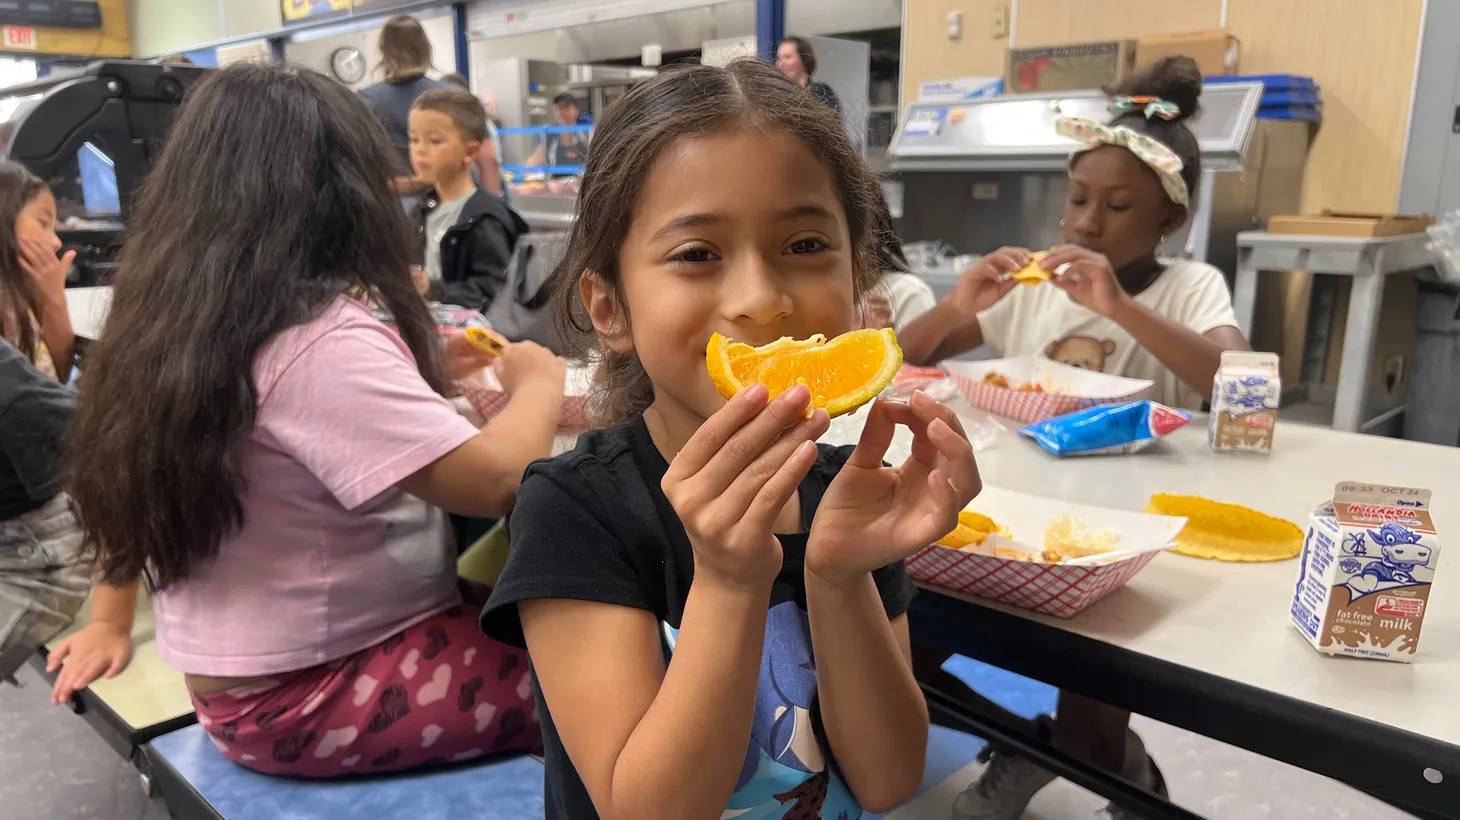 Baldy View Elementary School student Dessilouu Padilla is all smiles when she learns her orange was grown on a nearby farm.